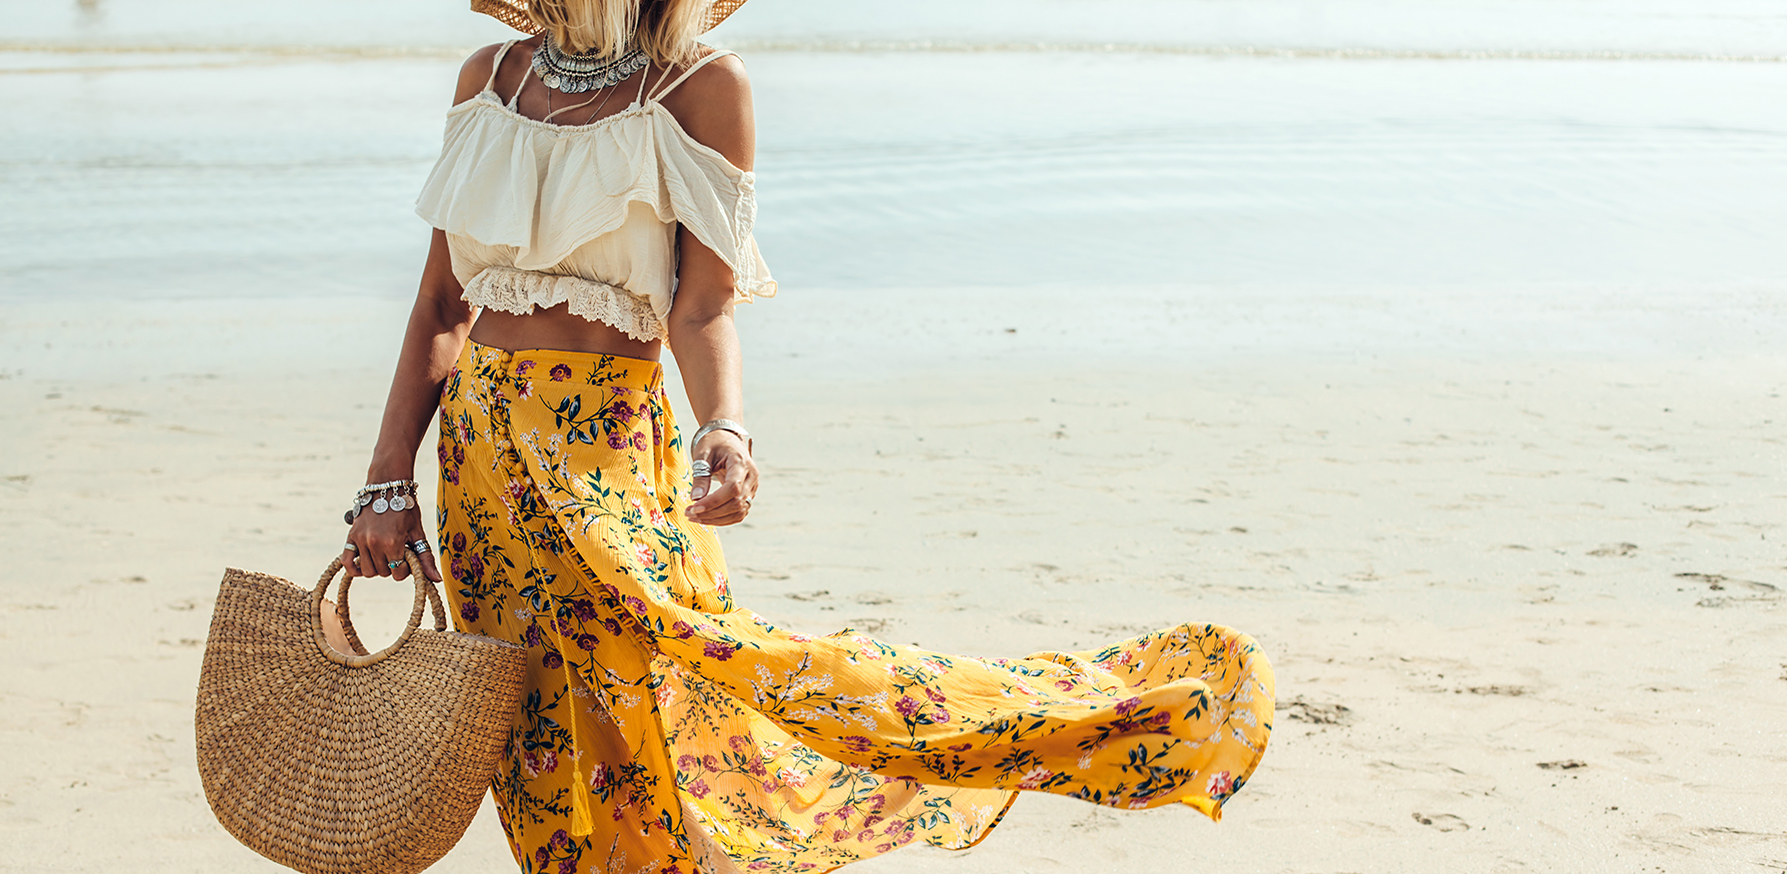 how-to-style-a-maxi-skirt-fashionable-woman-on-the-beach-in-maxi-skirt